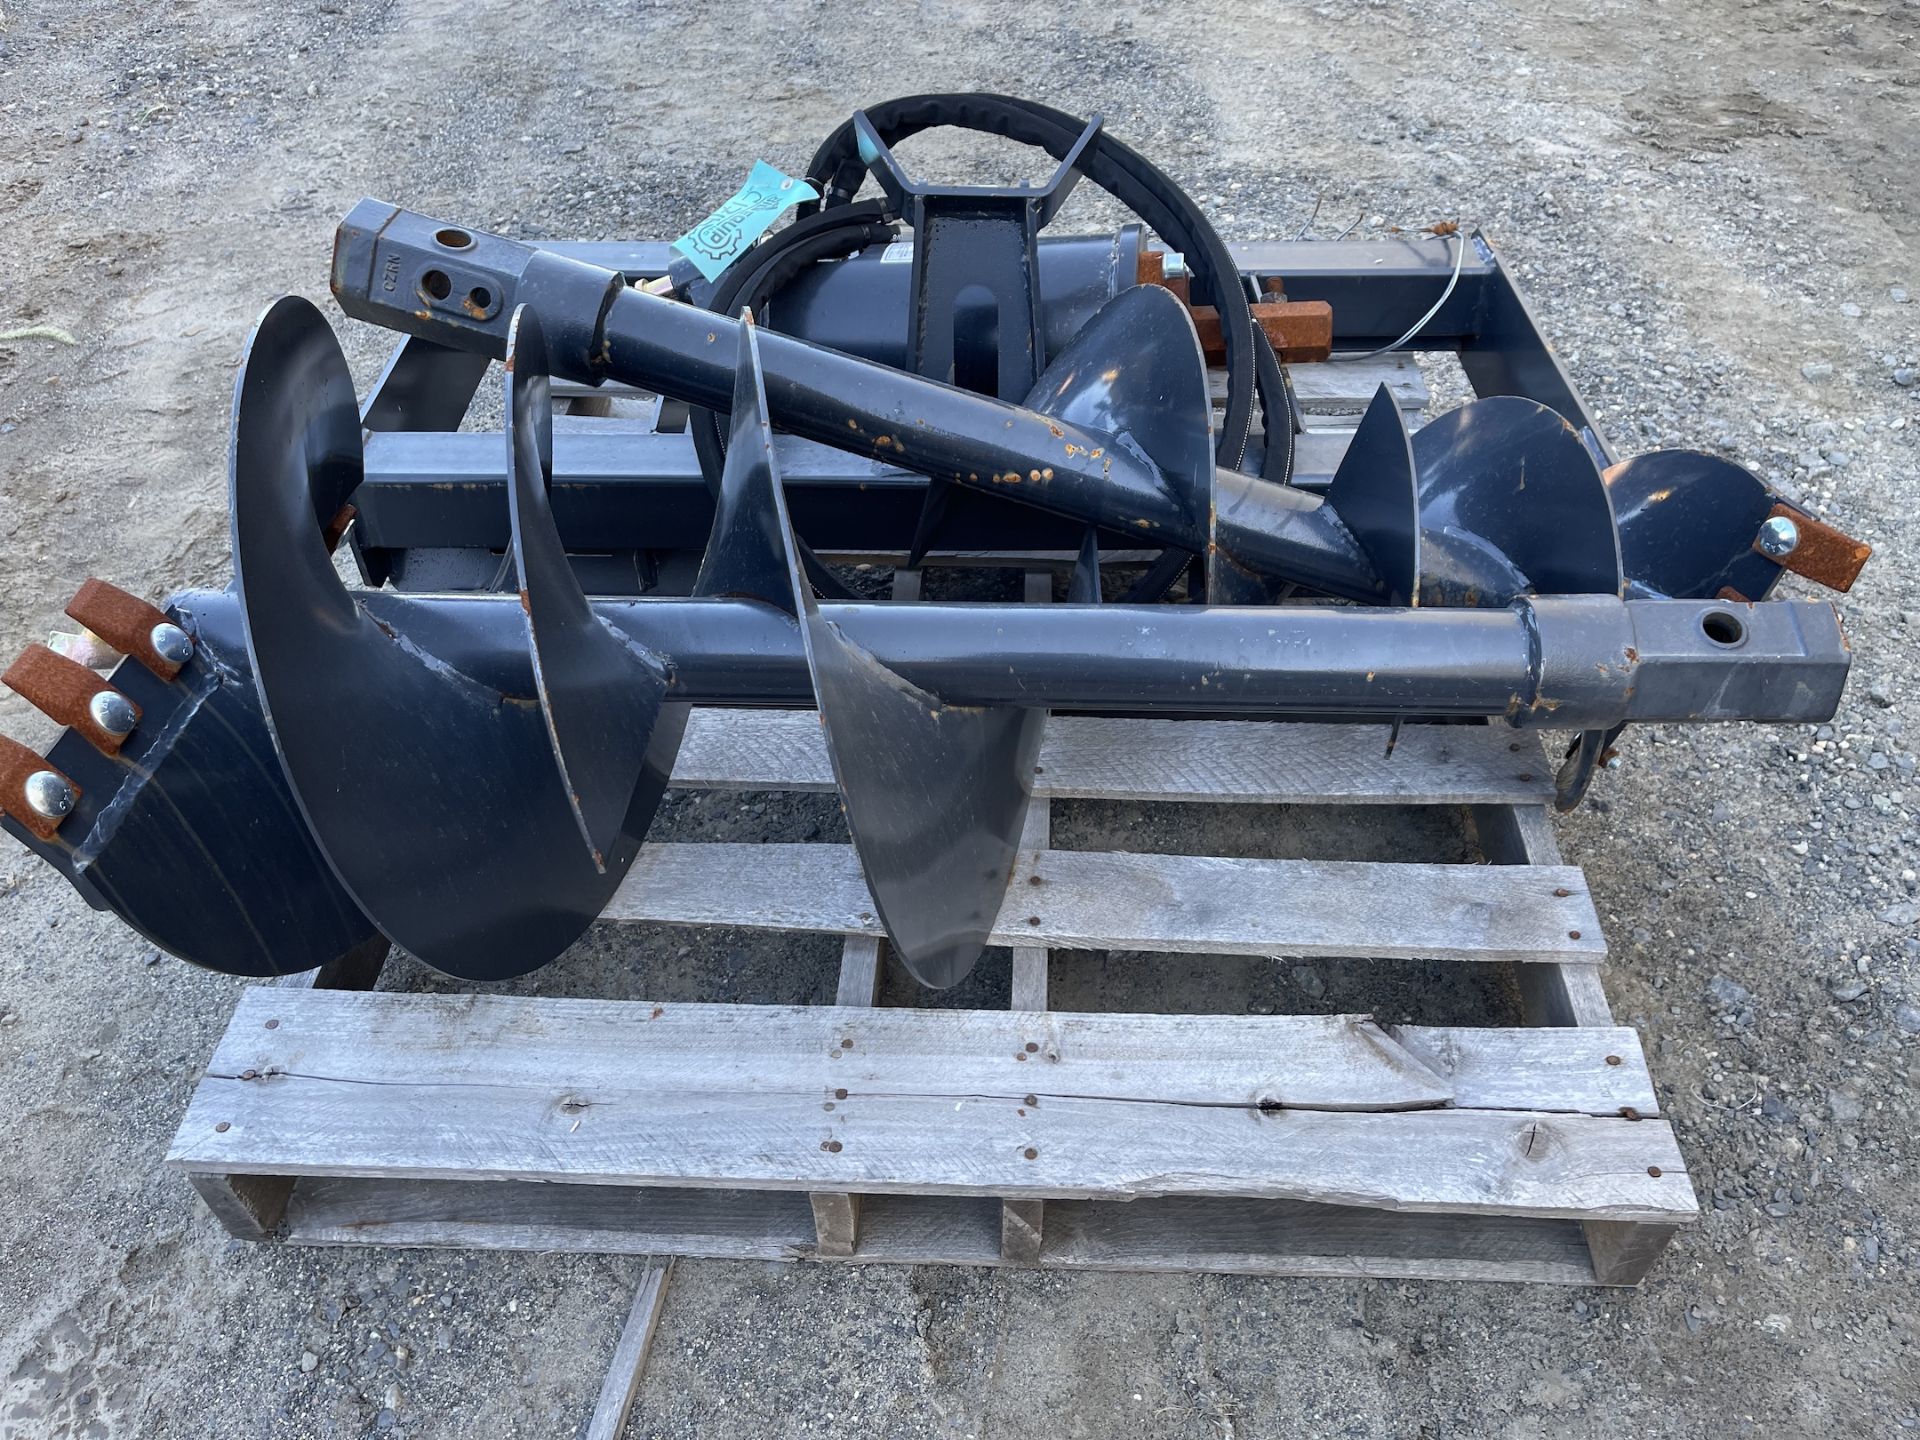 New Wolverine Auger Skid Steer Attachment (C171E) - Image 5 of 11